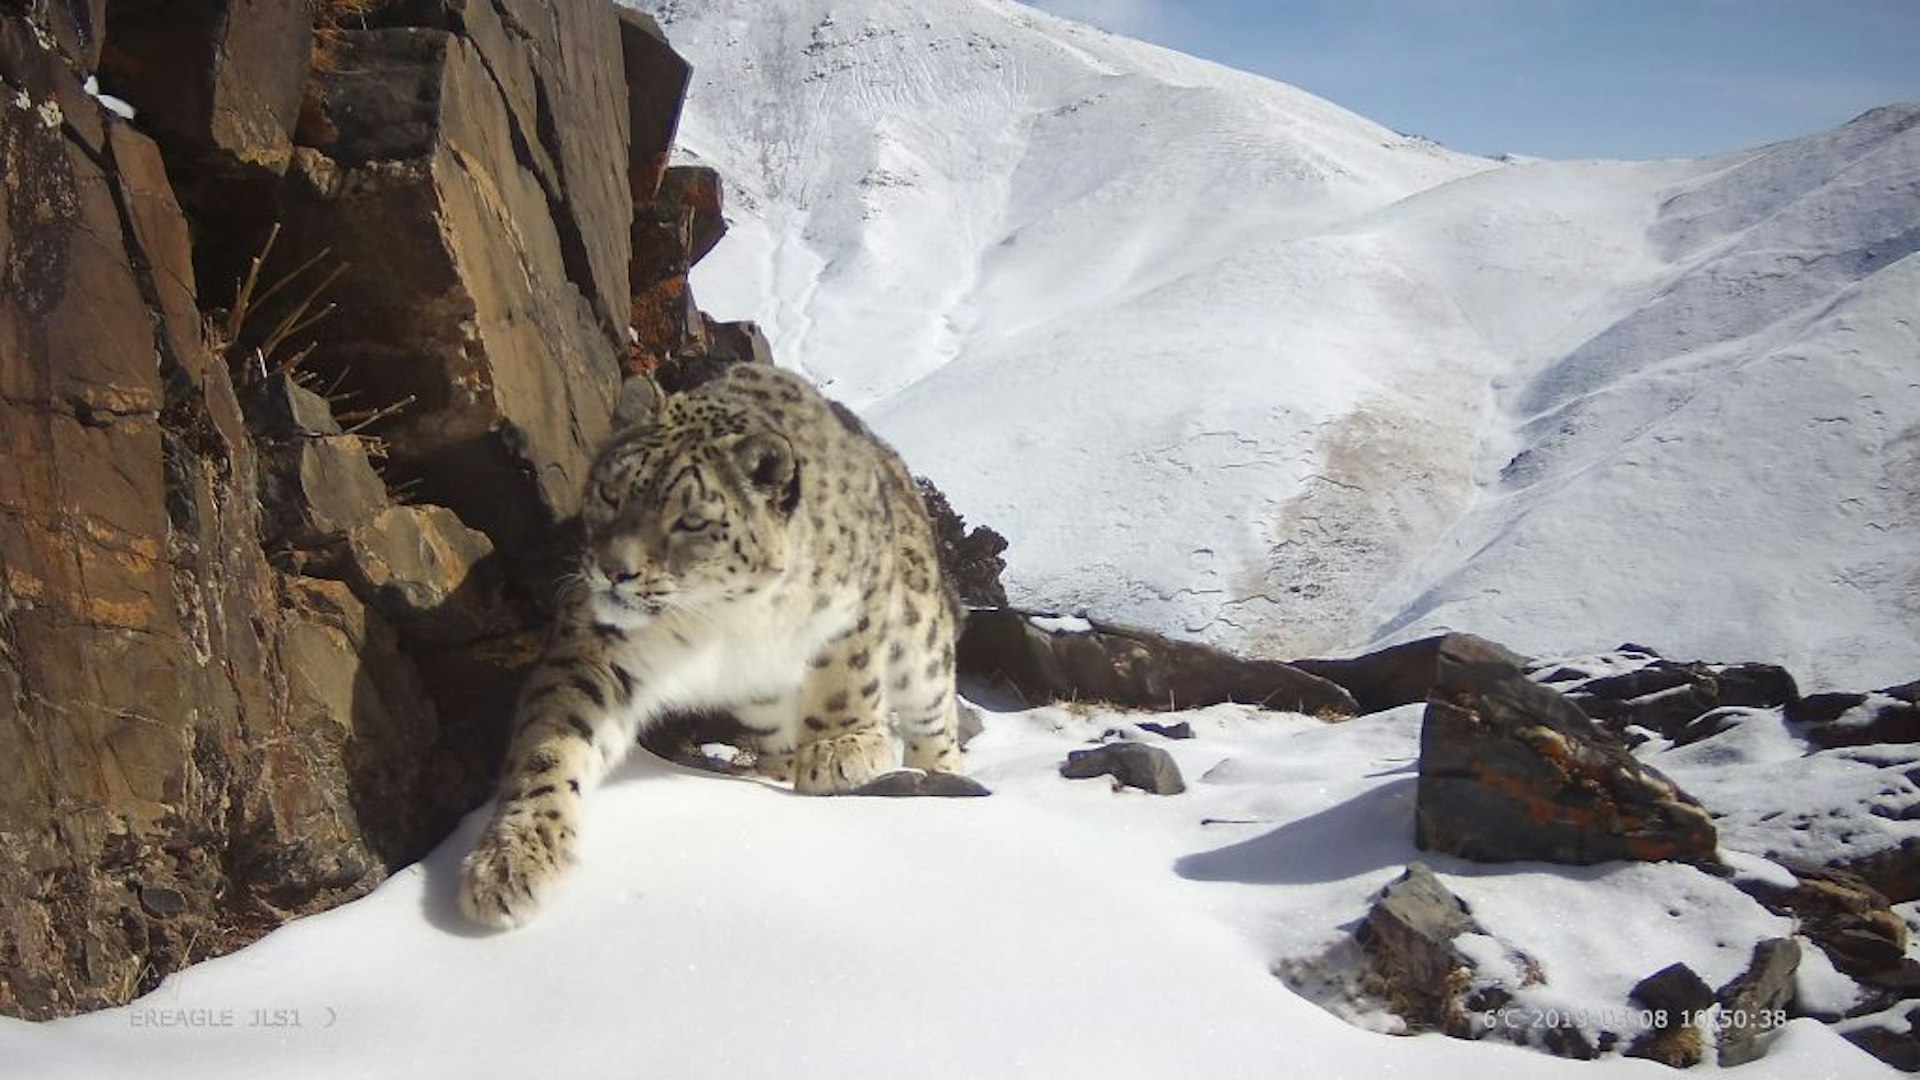 A snow leopard triggers an infrared camera in Three-River-Source National Park as it walks towards the camera, surrounded by snowy white mountains